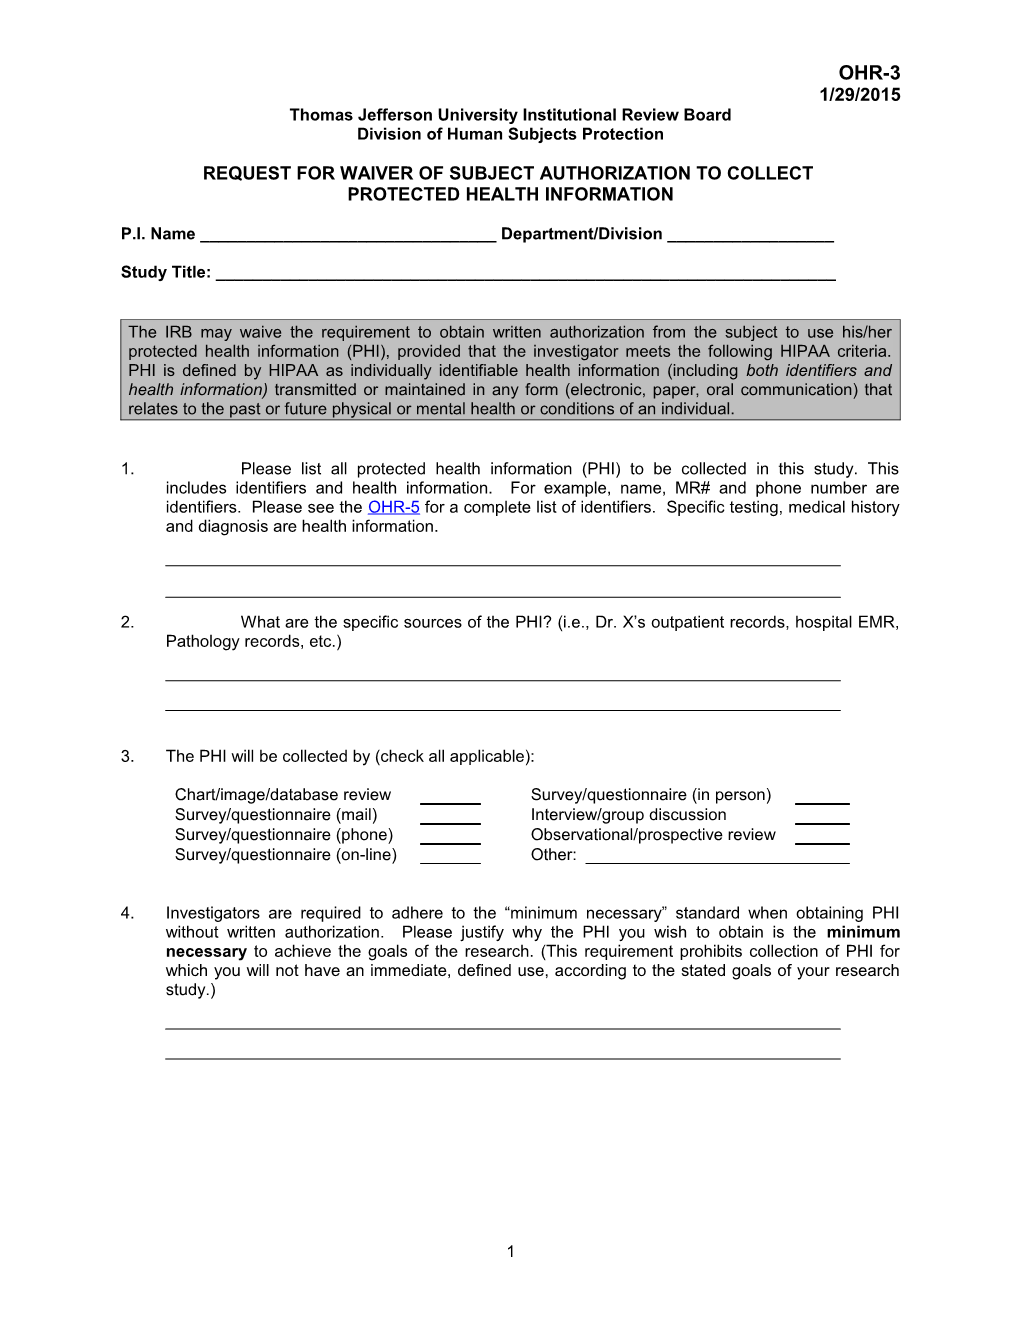 Hipaa Irb Waiver of Authorization to Collect Phi*